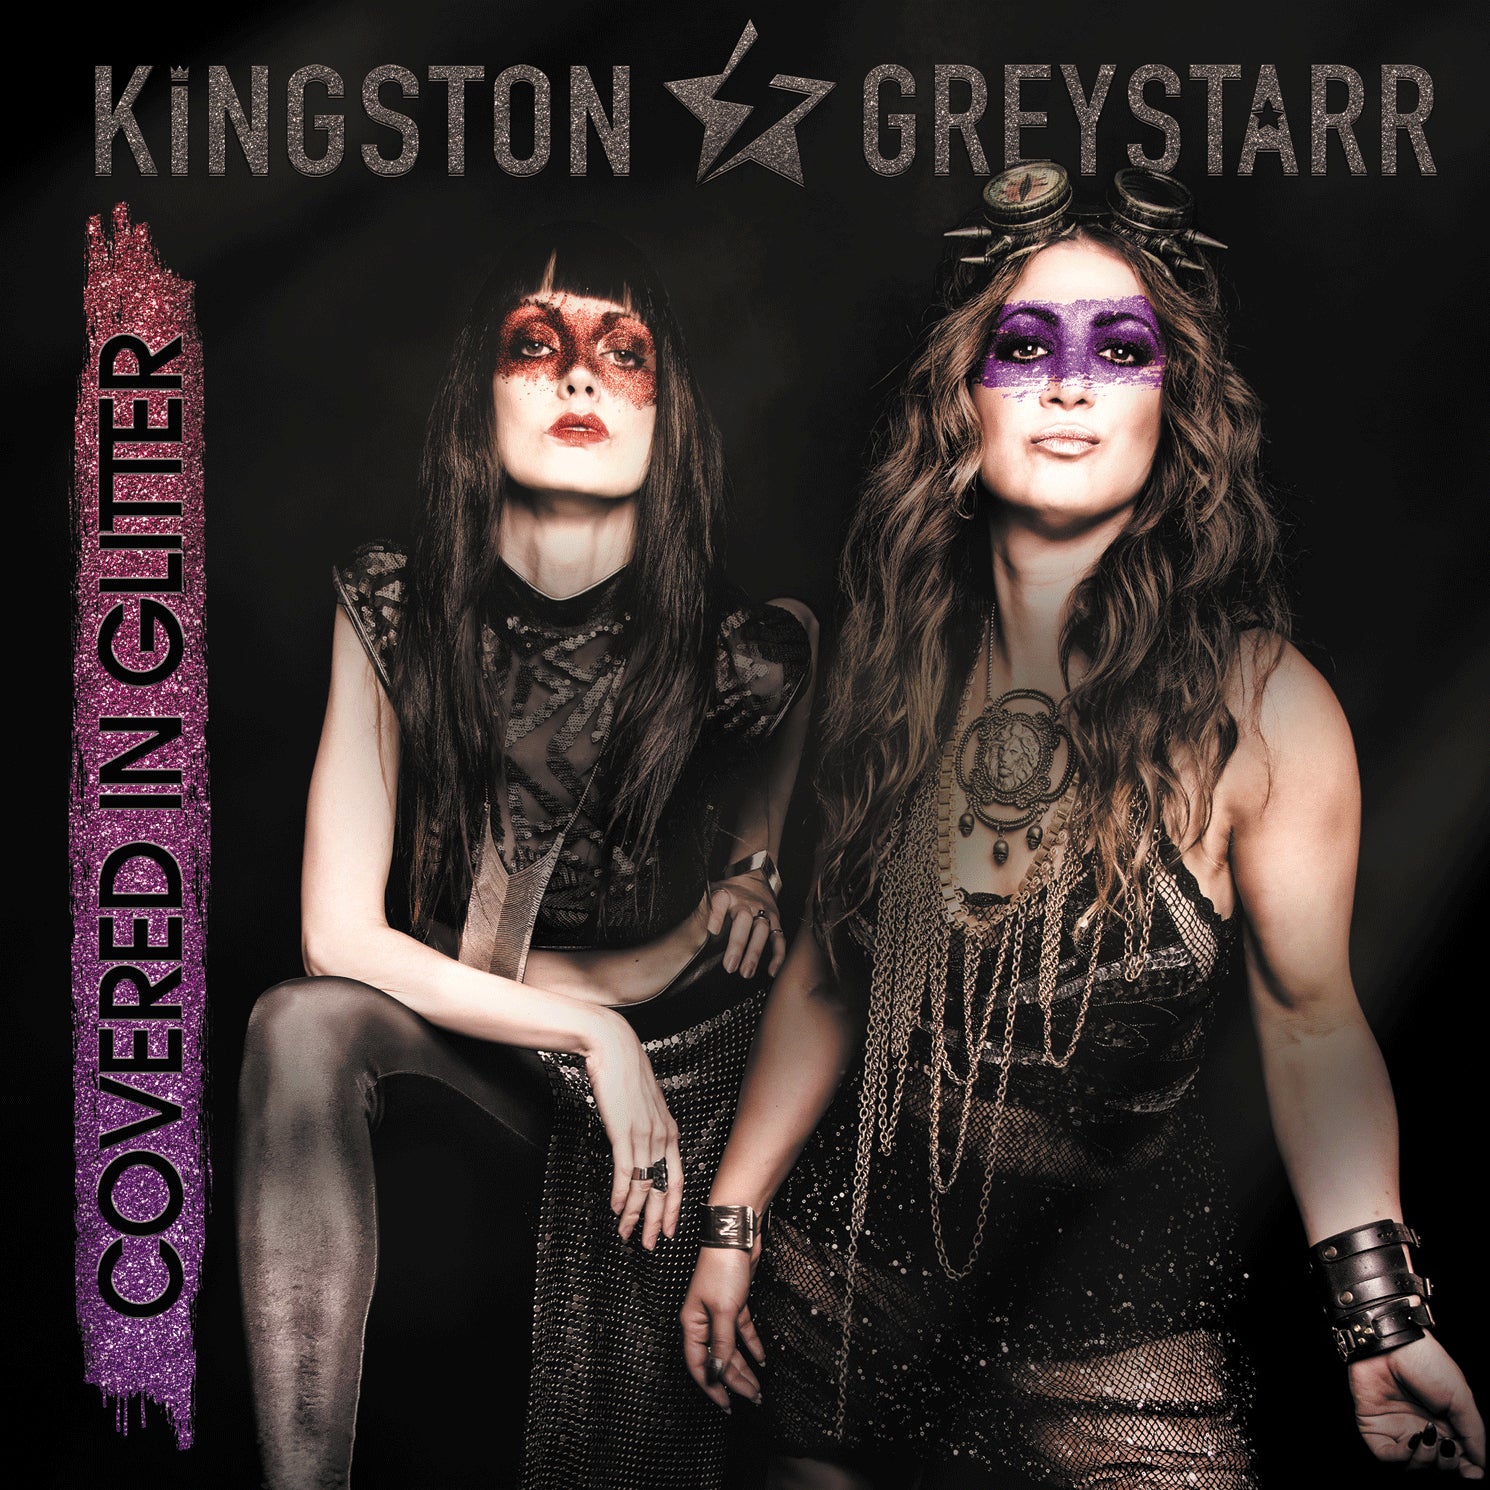 Kingston and Greystarr - Covered In Glitter